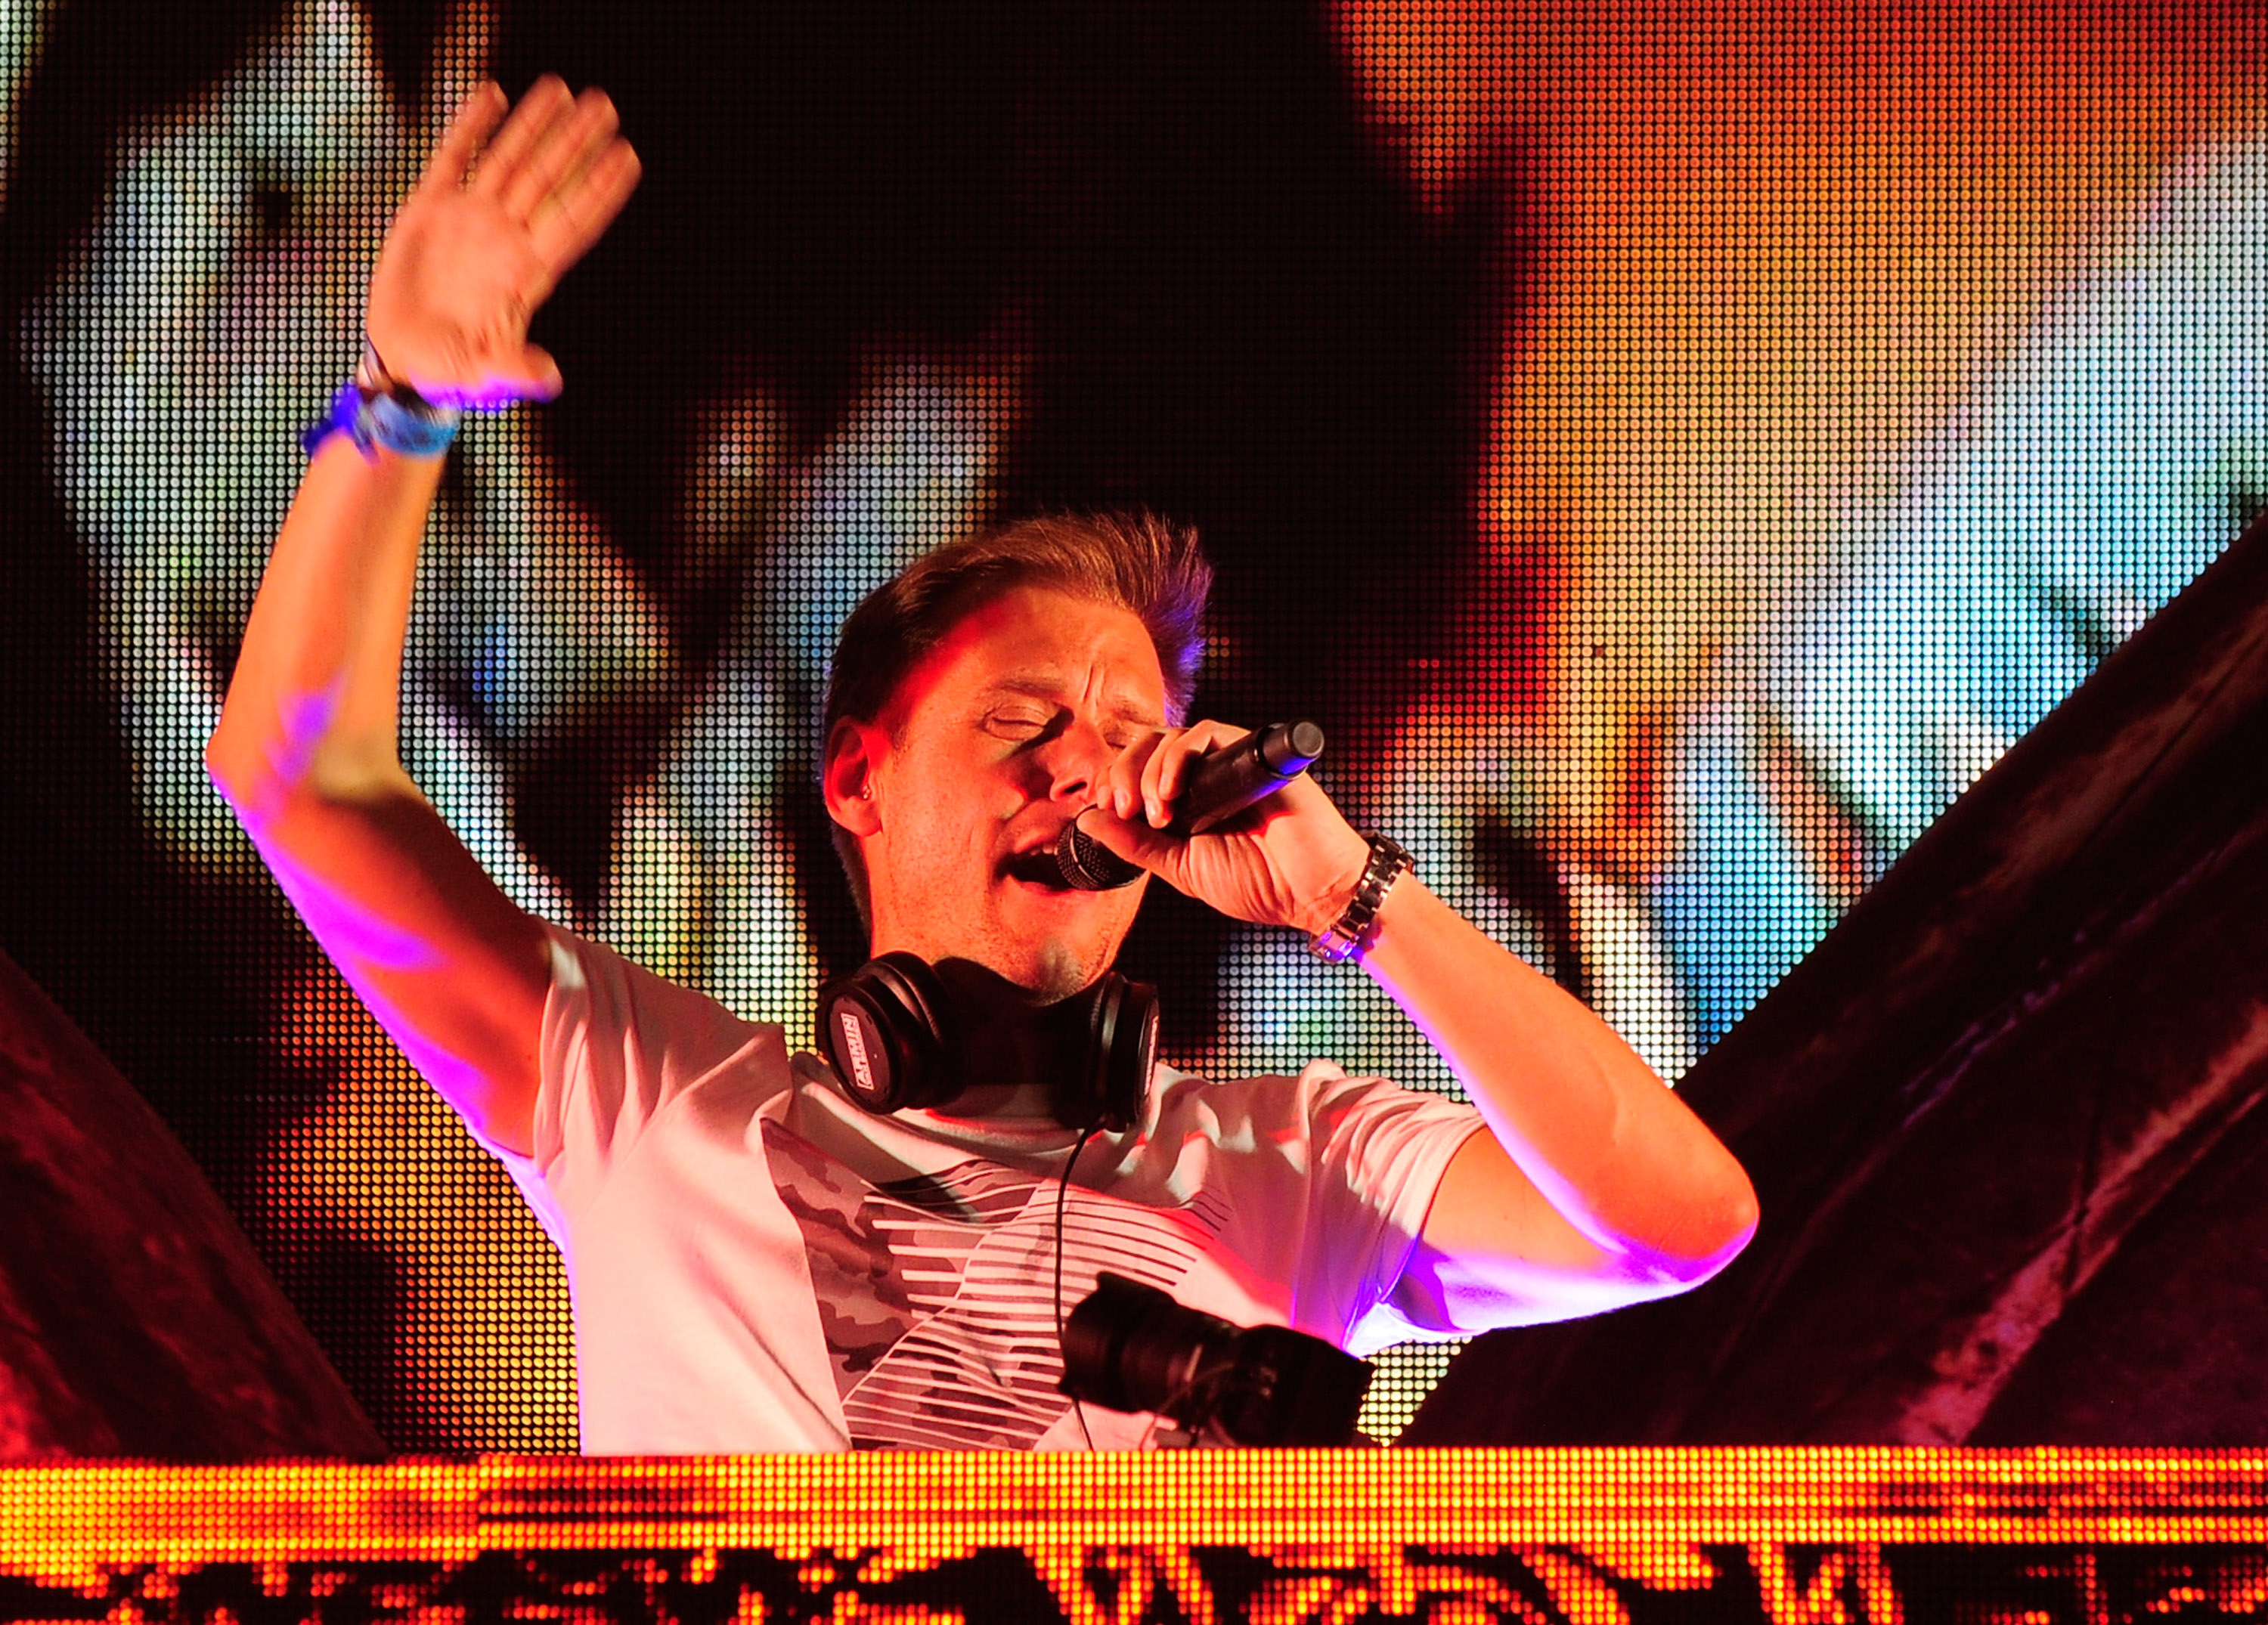 DJ/producer Armin Van Buuren performs during the 21st annual Electric Daisy Carnival at Las Vegas Motor Speedway on June 17, 2017 in Las Vegas, Nevada. (Steven—Getty Images)